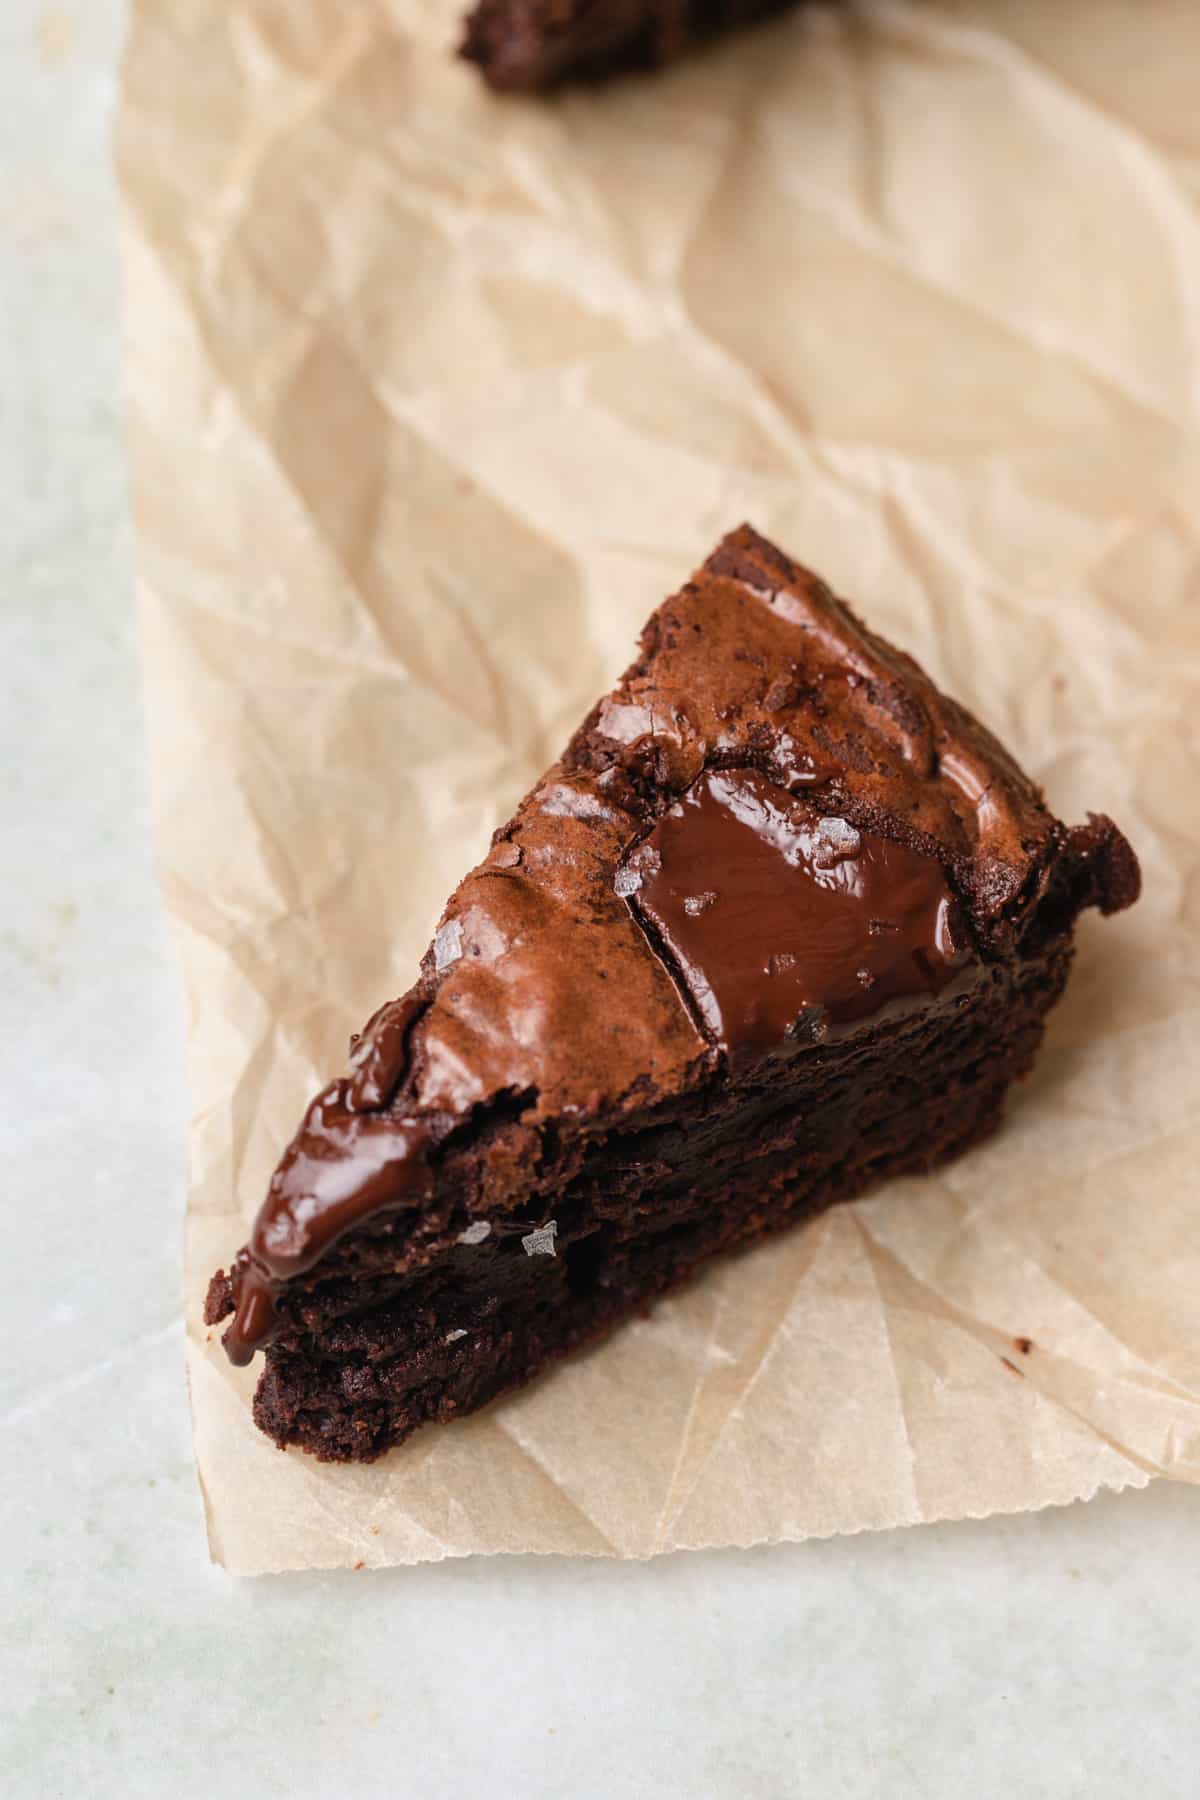 A brownie slice on tan parchment paper.